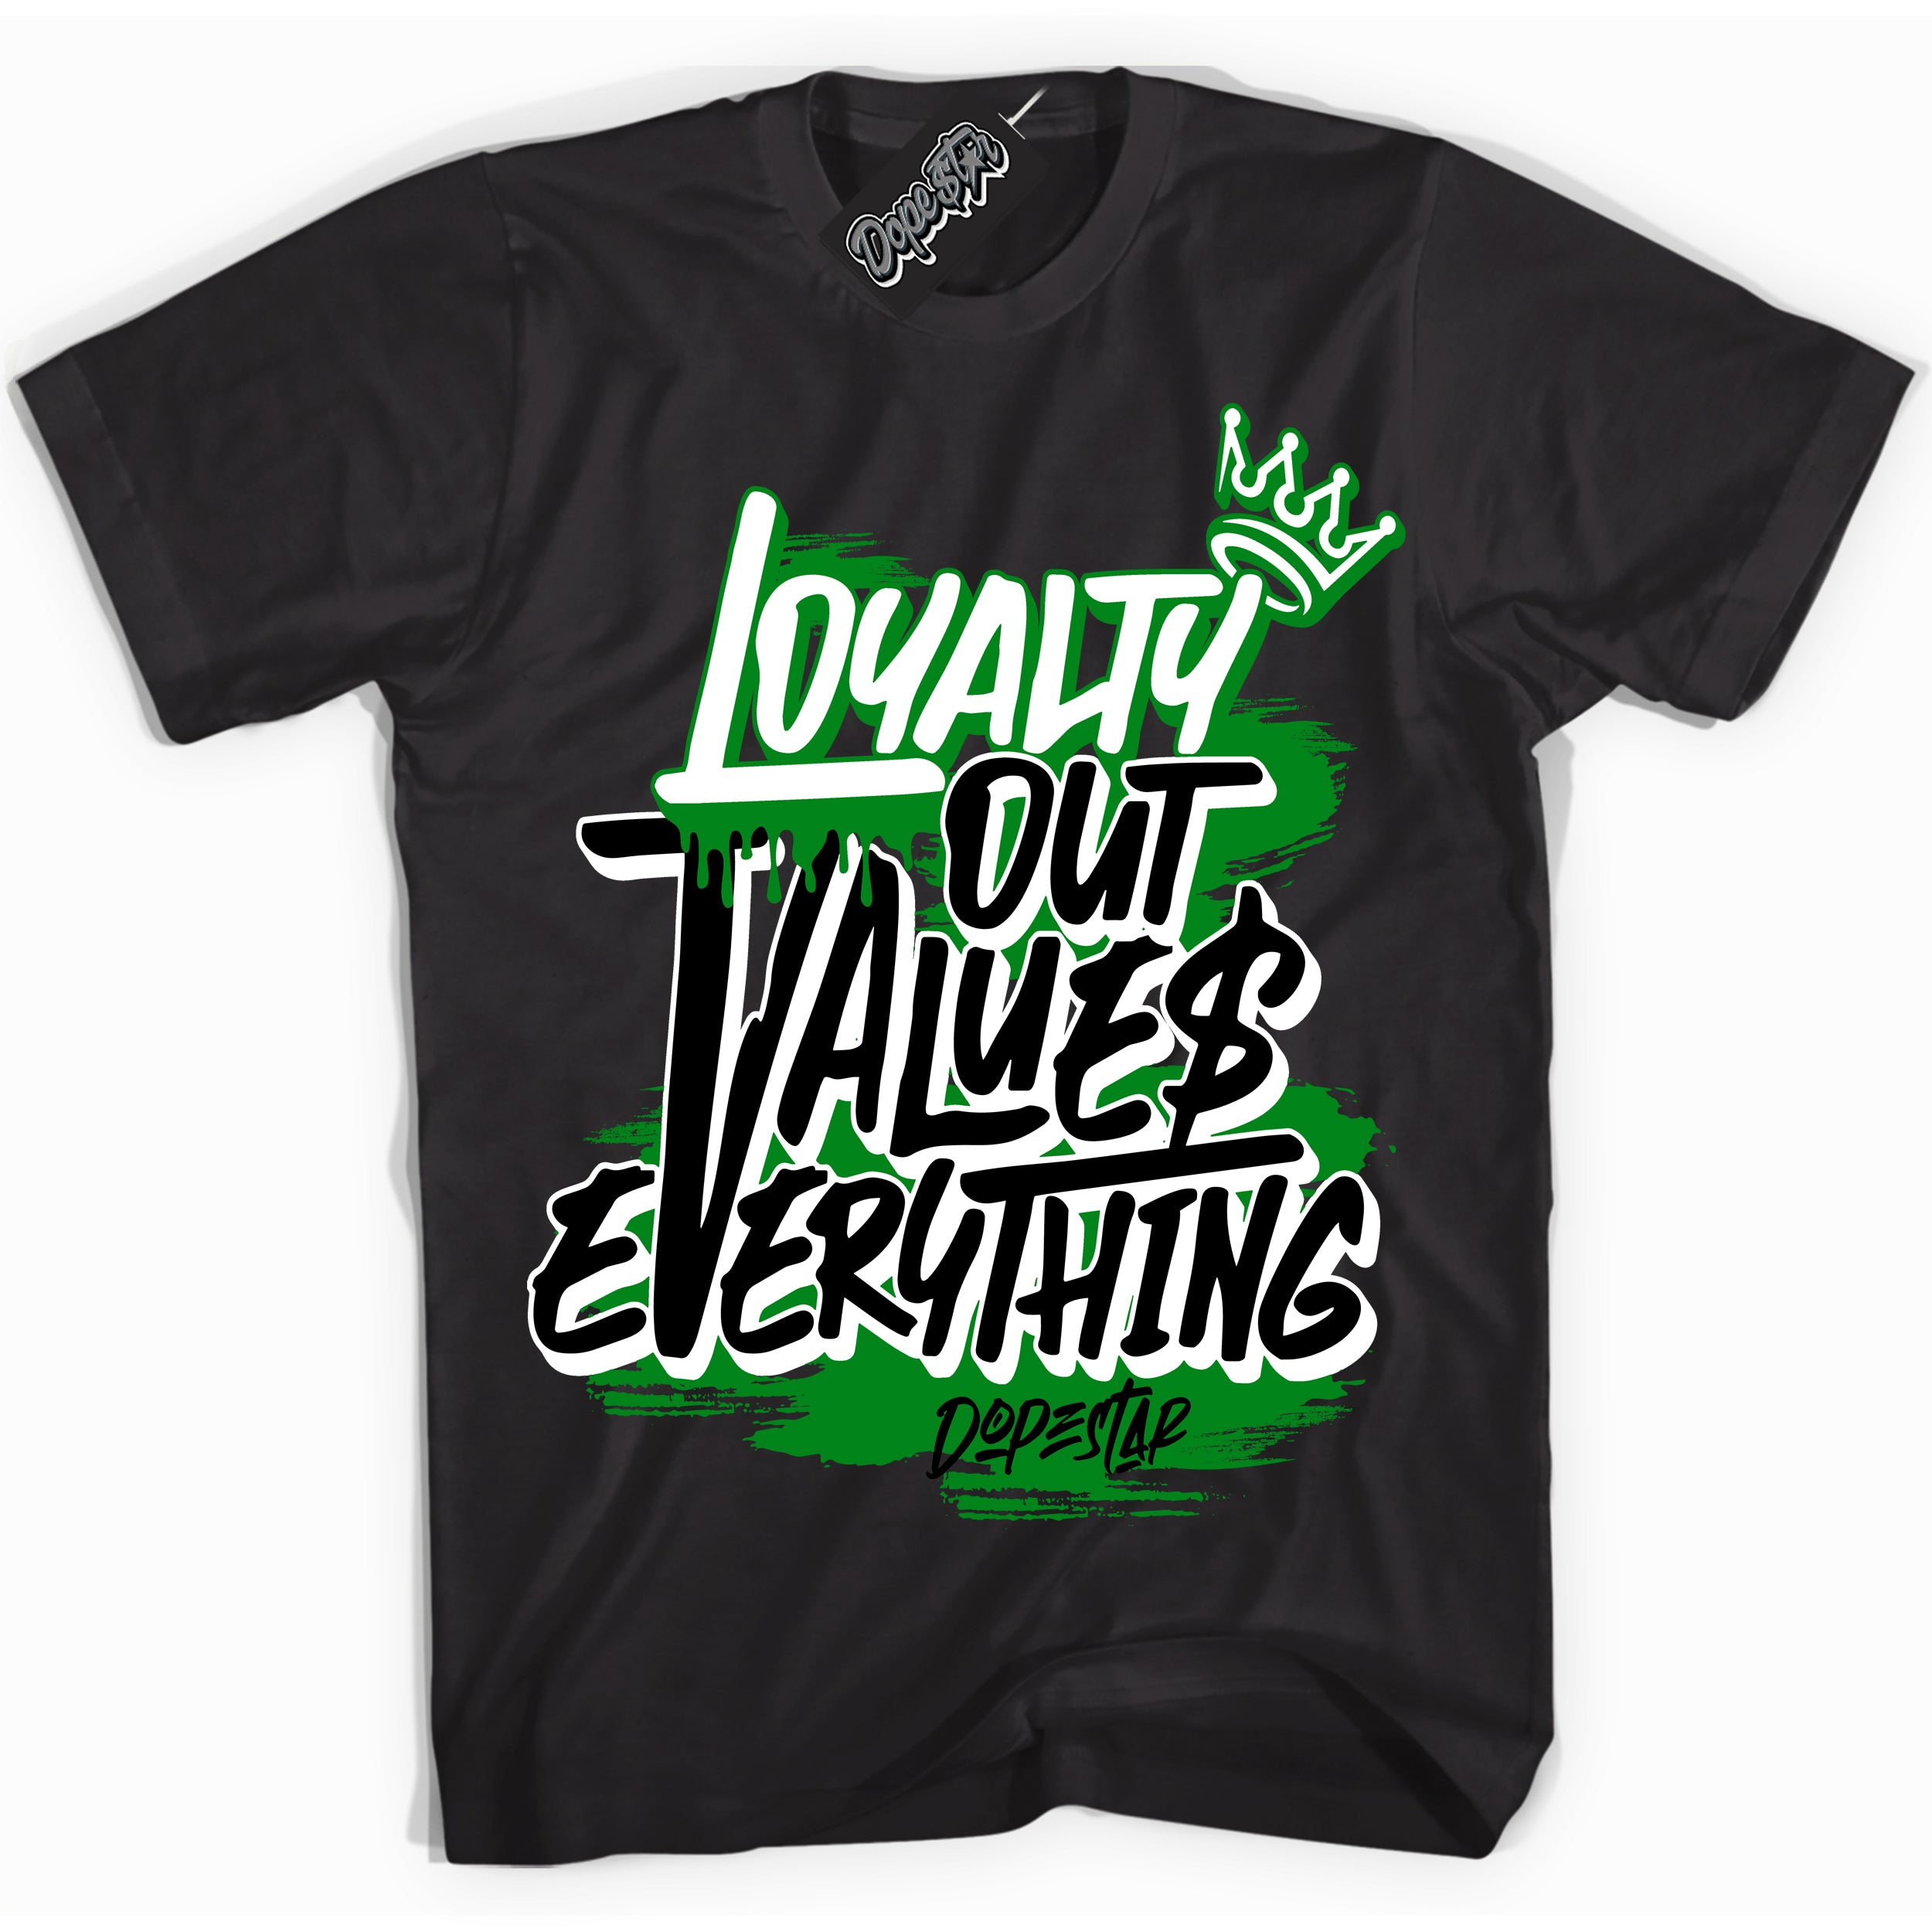 Cool Black Shirt with “ Loyalty Out Values Everything” design that perfectly matches OG Lucky Green 1s Sneakers.